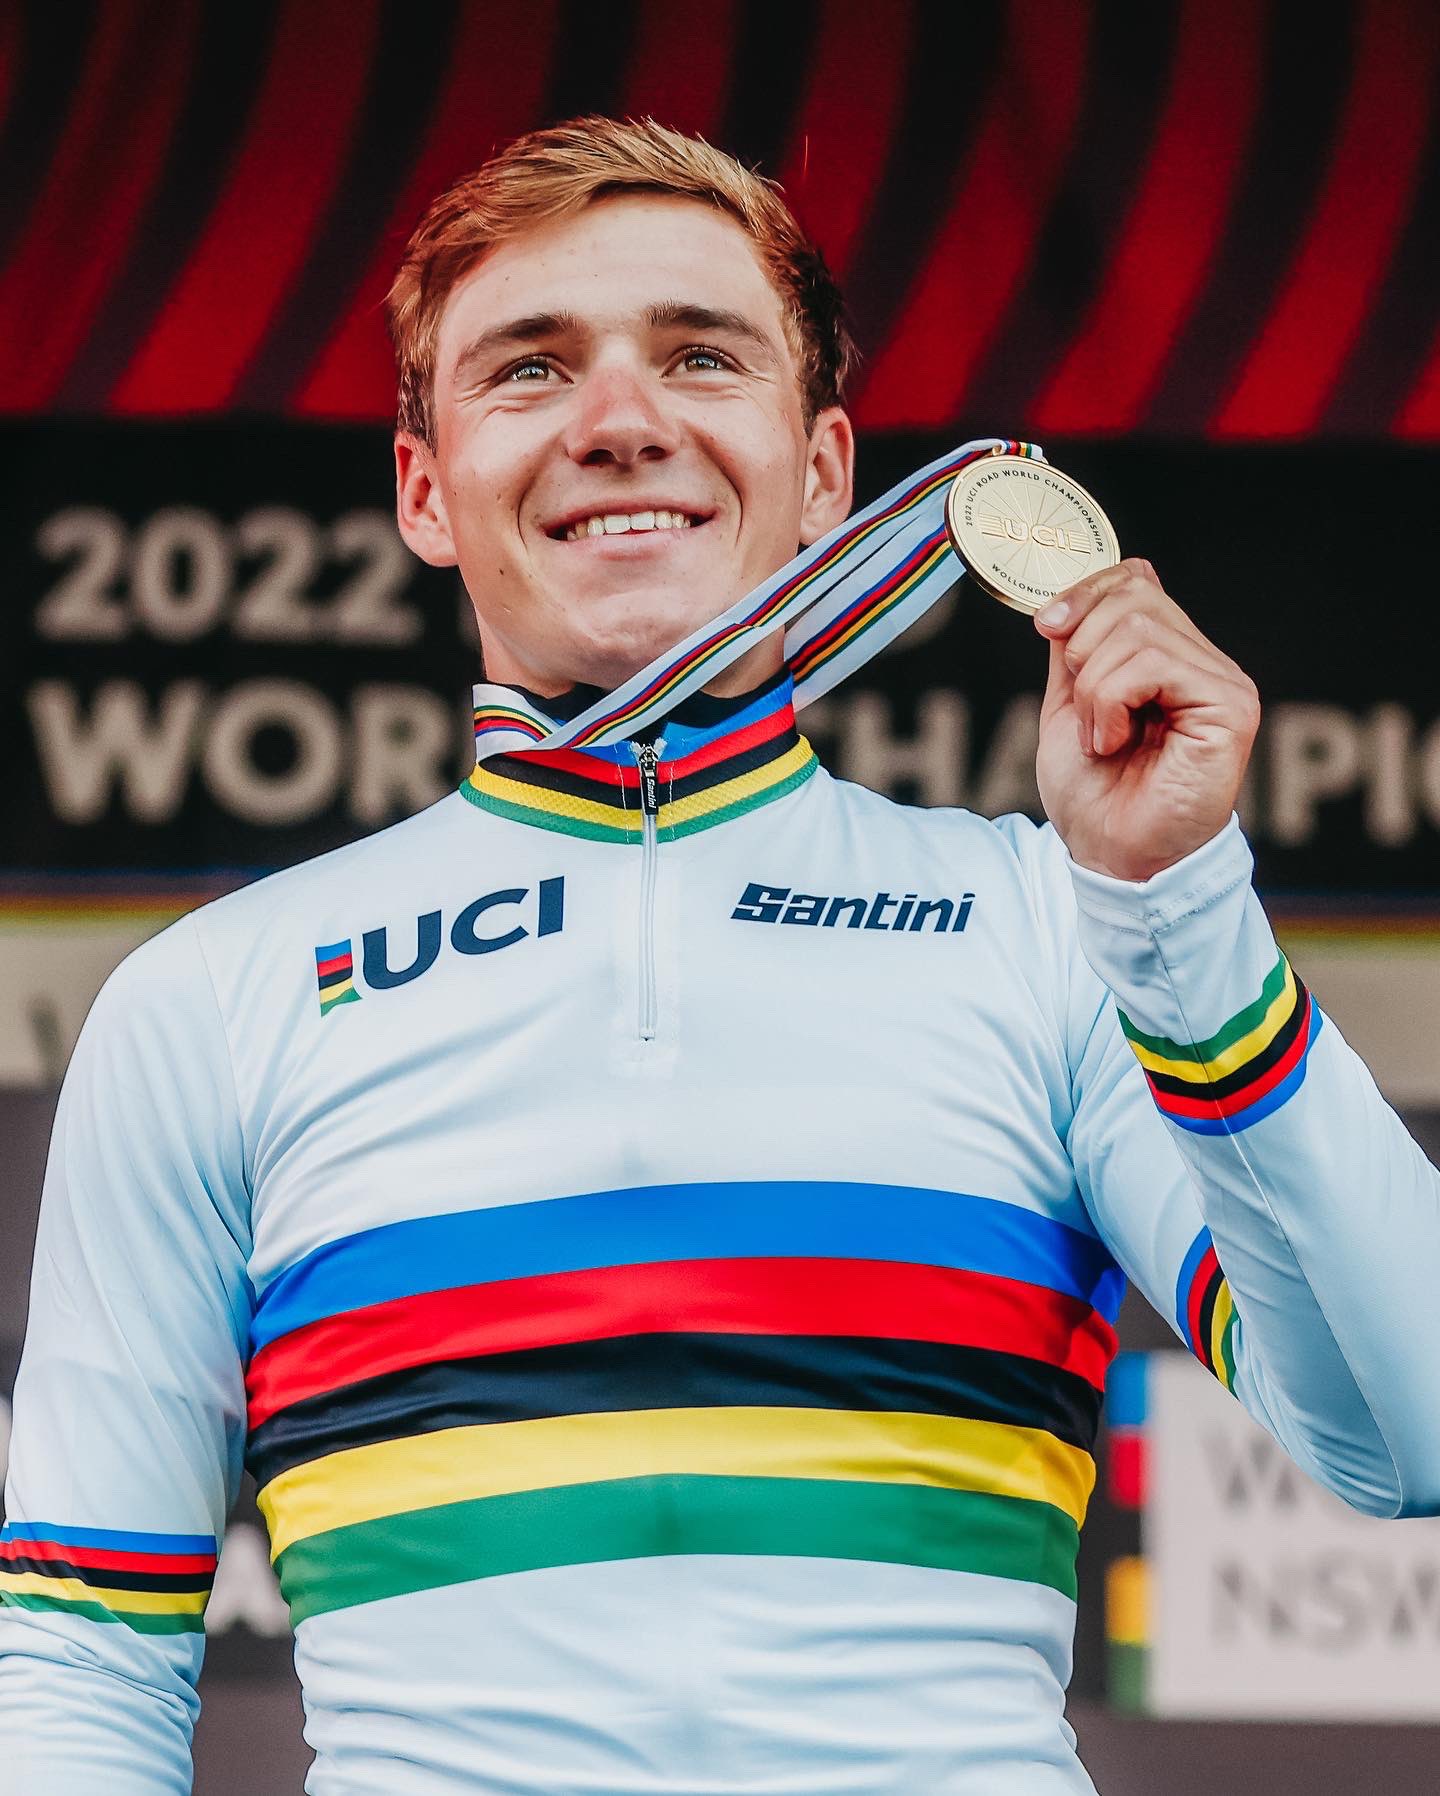 Remco Evenepoel on X: World Champion 2022! 🇧🇪🌈🥇🔥 Dreams do come true,  can't wait to wear the Rainbow Jersey next season!! 🙏🏼 Thanks to the  entire team for the amazing work toda